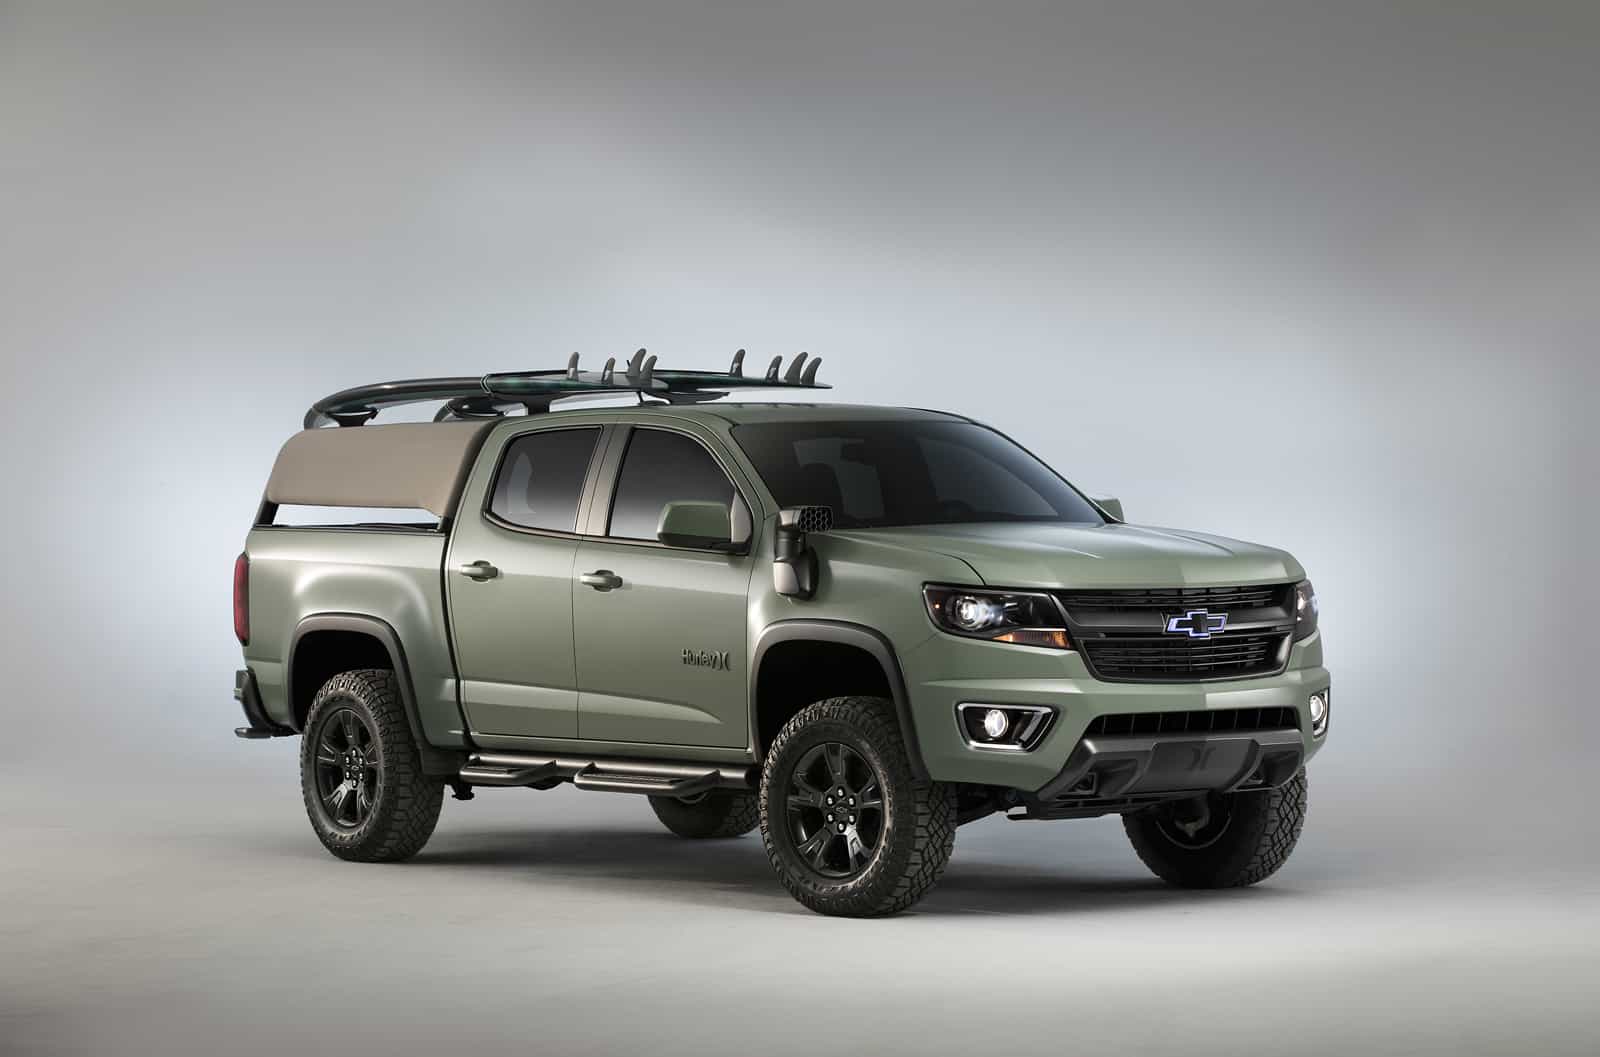 Chevrolet and Hurley, the surfing performance and innovation brand, announce the Colorado Z71 Hurley concept – a collaboration designed to get surfers and their gear around with functionality and style. This ultimate wave wanderer, which also serves as a mobile beach command center, is decked out with a custom surfboard rack, storage systems and even water-resistant seat covers made from advanced ventiprene – a breathable material similar to the neoprene used in surfing wetsuits.